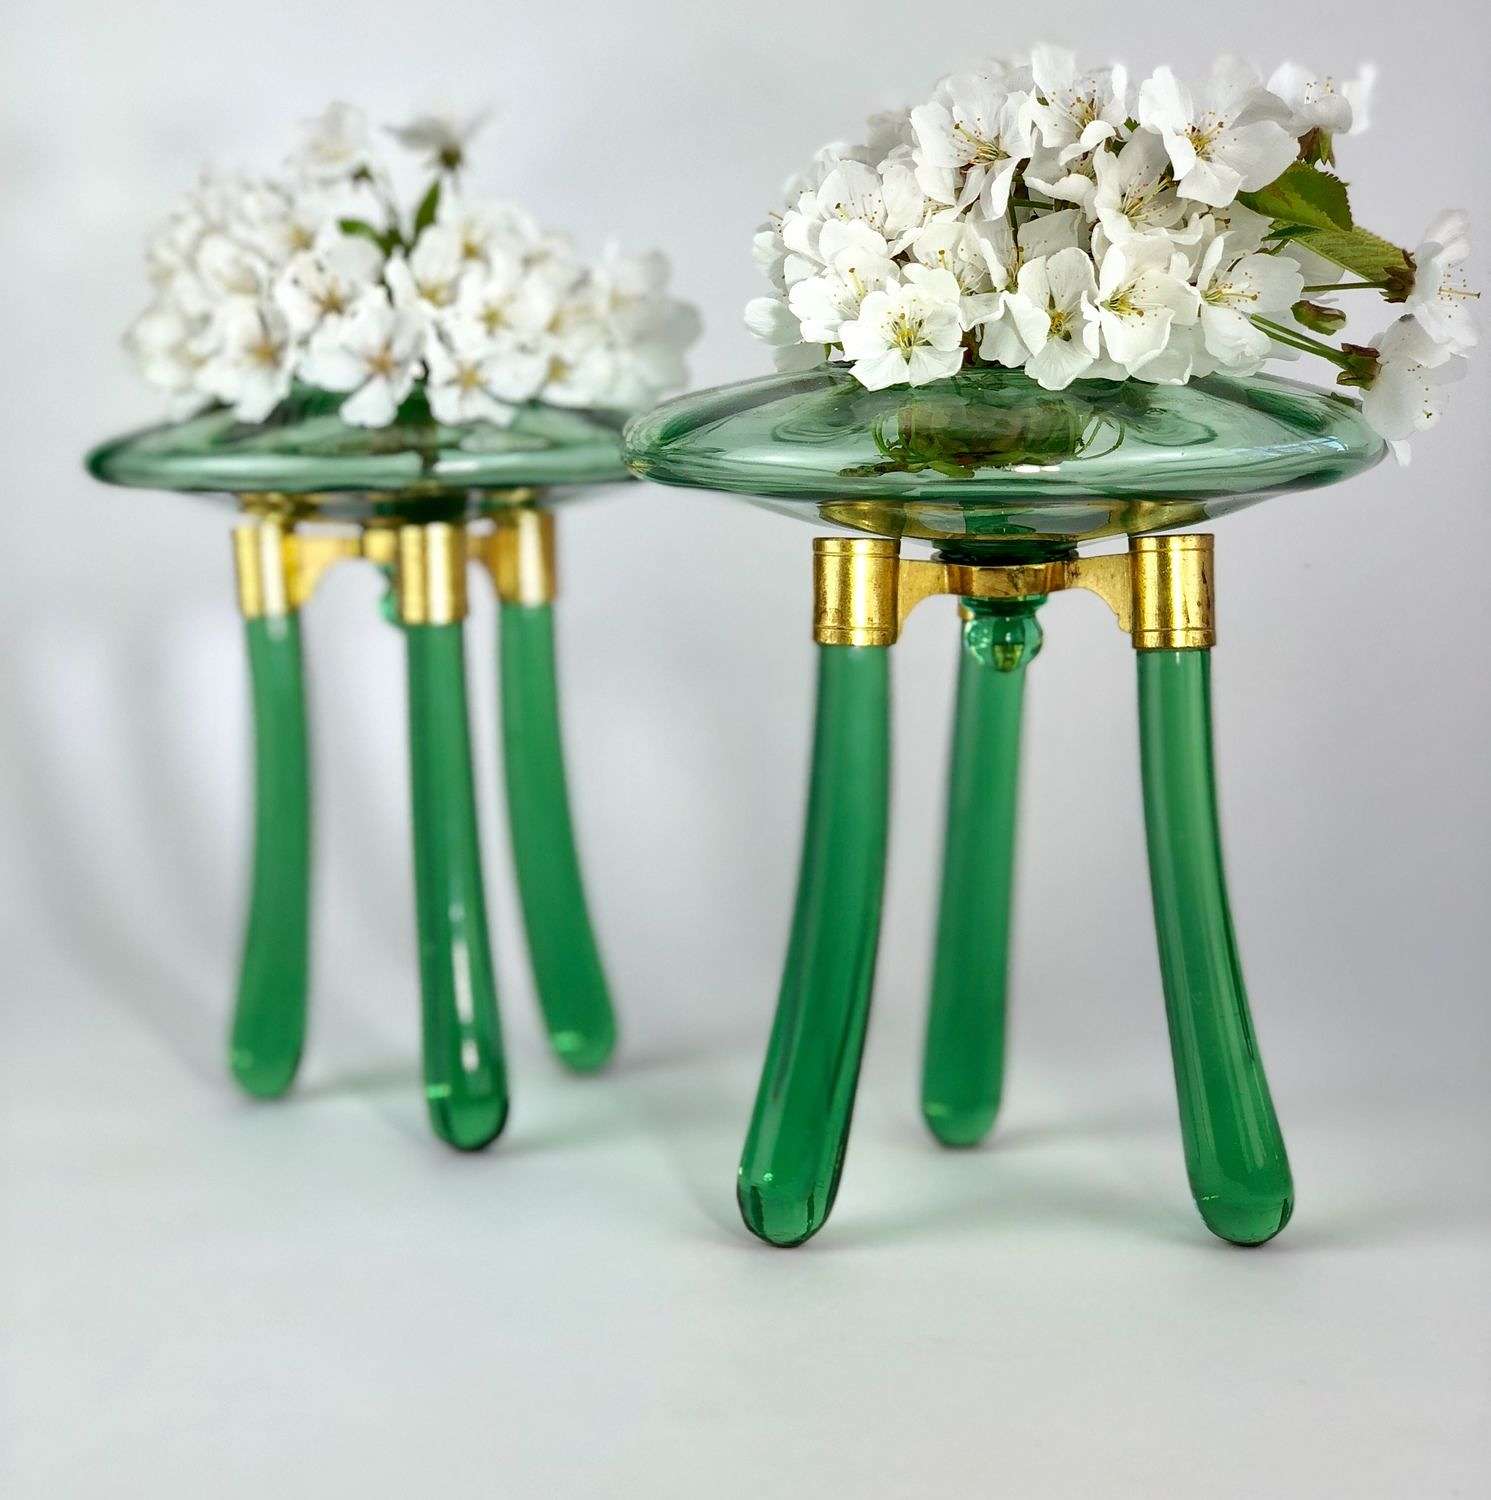 Pair of Secessionist glass and gilt table centrepieces